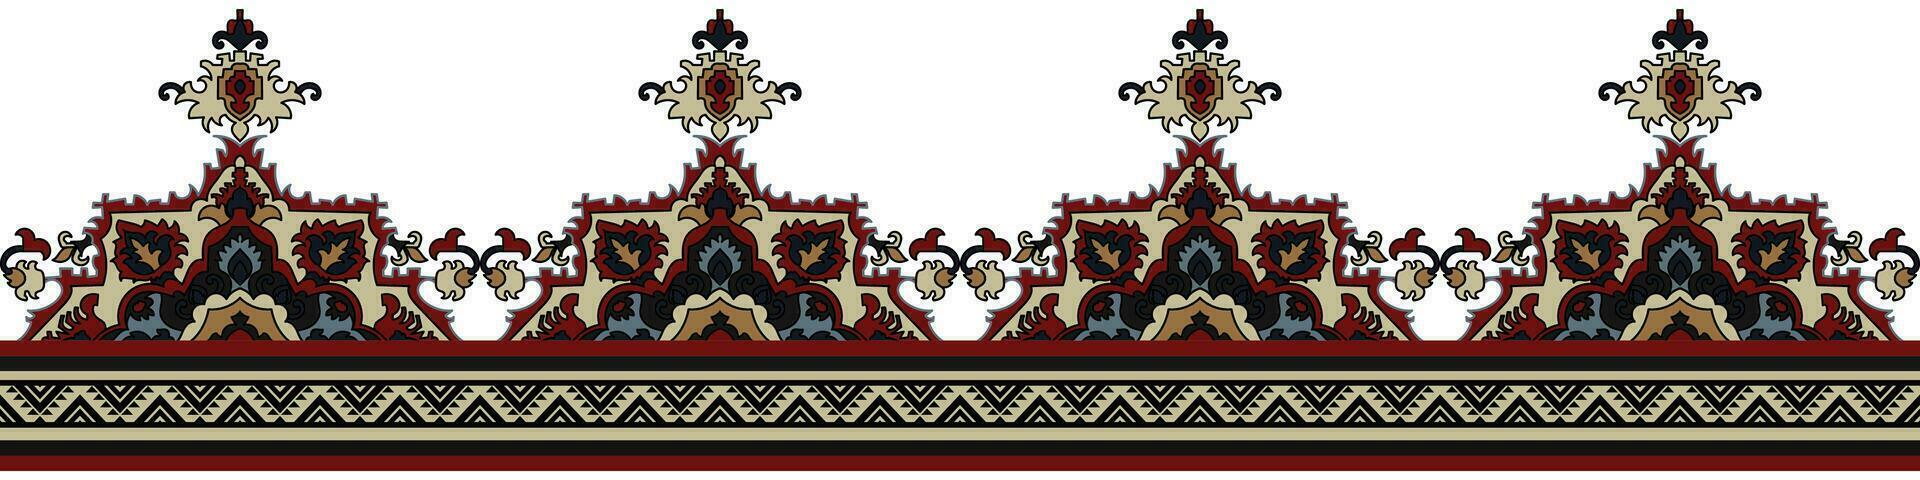 carpet pattern Textile digital design motif pattern decor hand made artwork frame gift card wallpaper women cloth front back and duppata print element of baroque ornament paisley abstract border rug vector